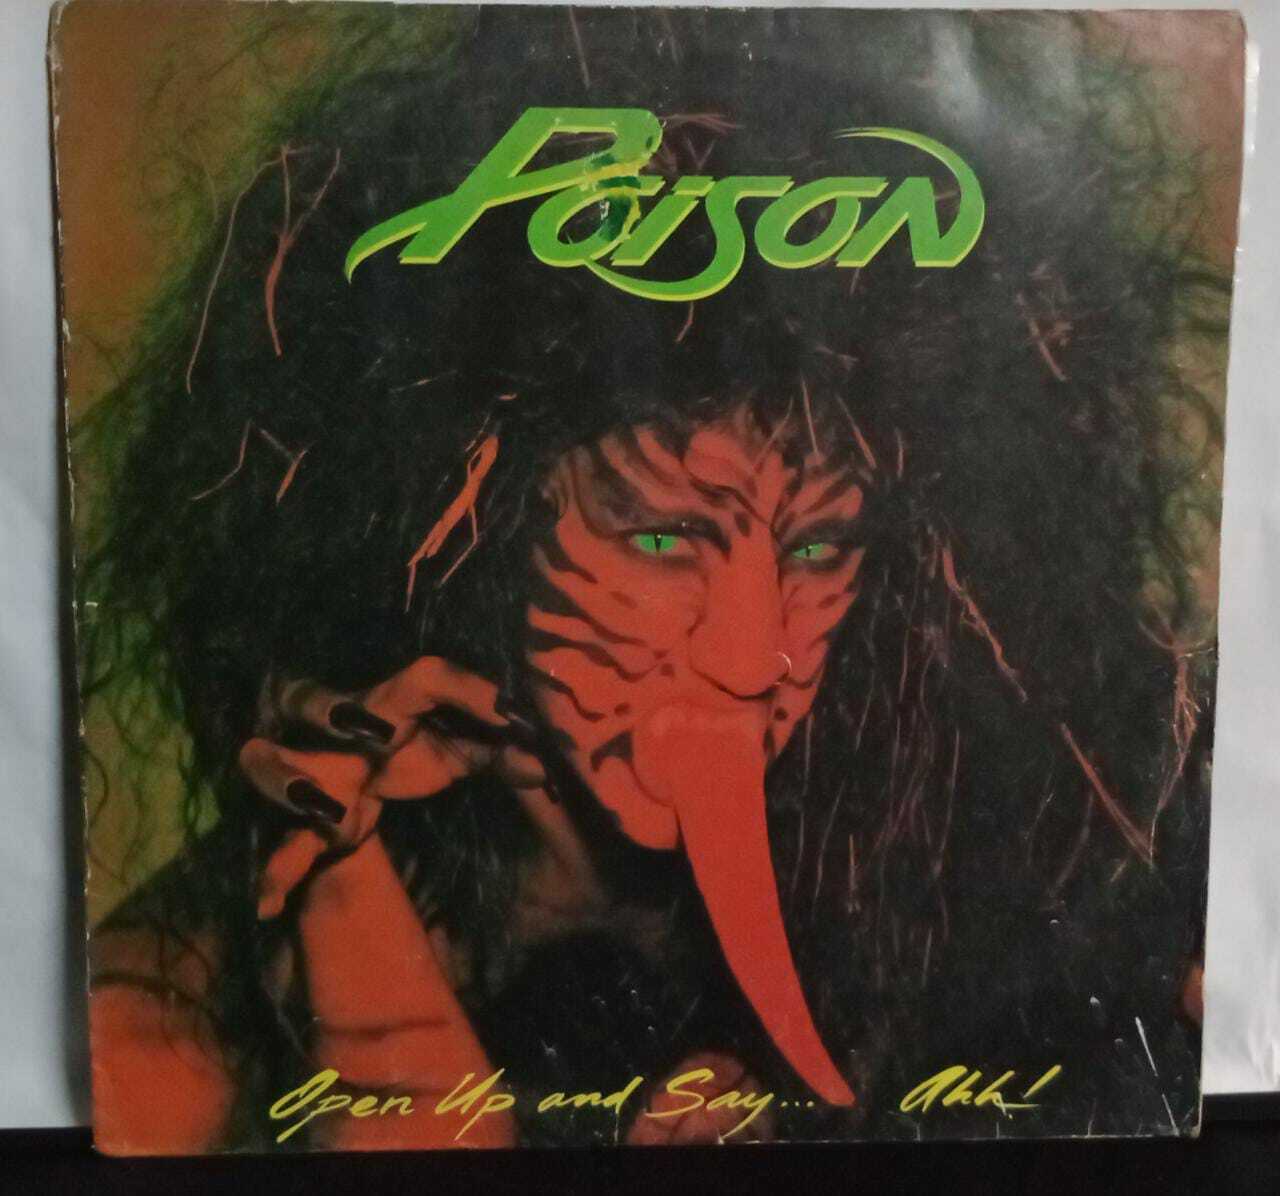 Vinil - Poison - Open Up and Say,,, Ahh!